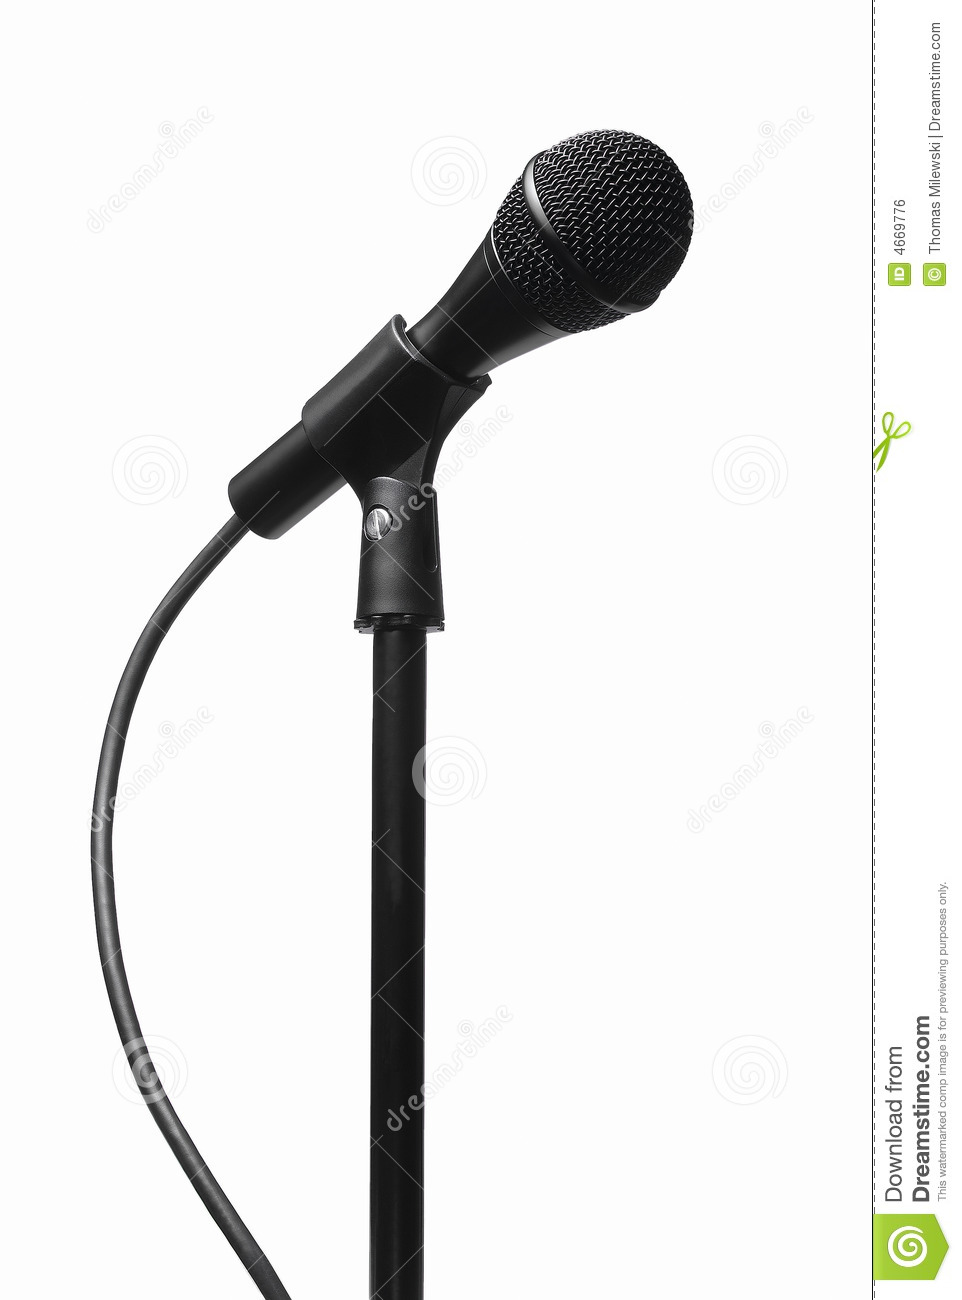 Classic Black Microphone On Stand Royalty Free Stock Image   Image